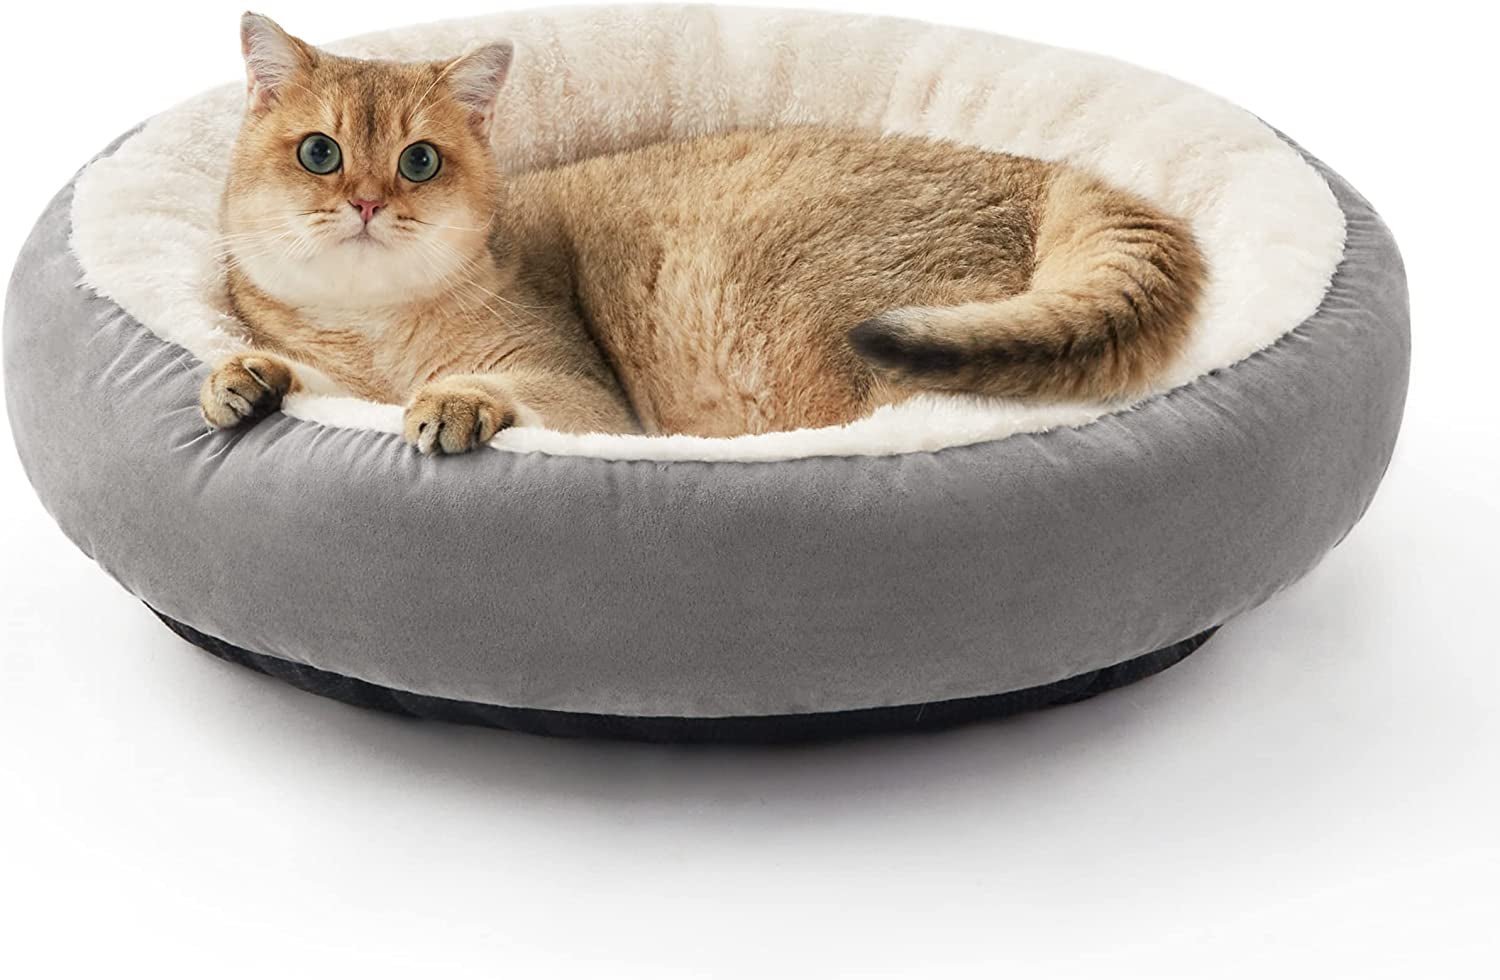 The Lap of Luxury for Feline Royalty: Purrfectly Comfy Cat Bed